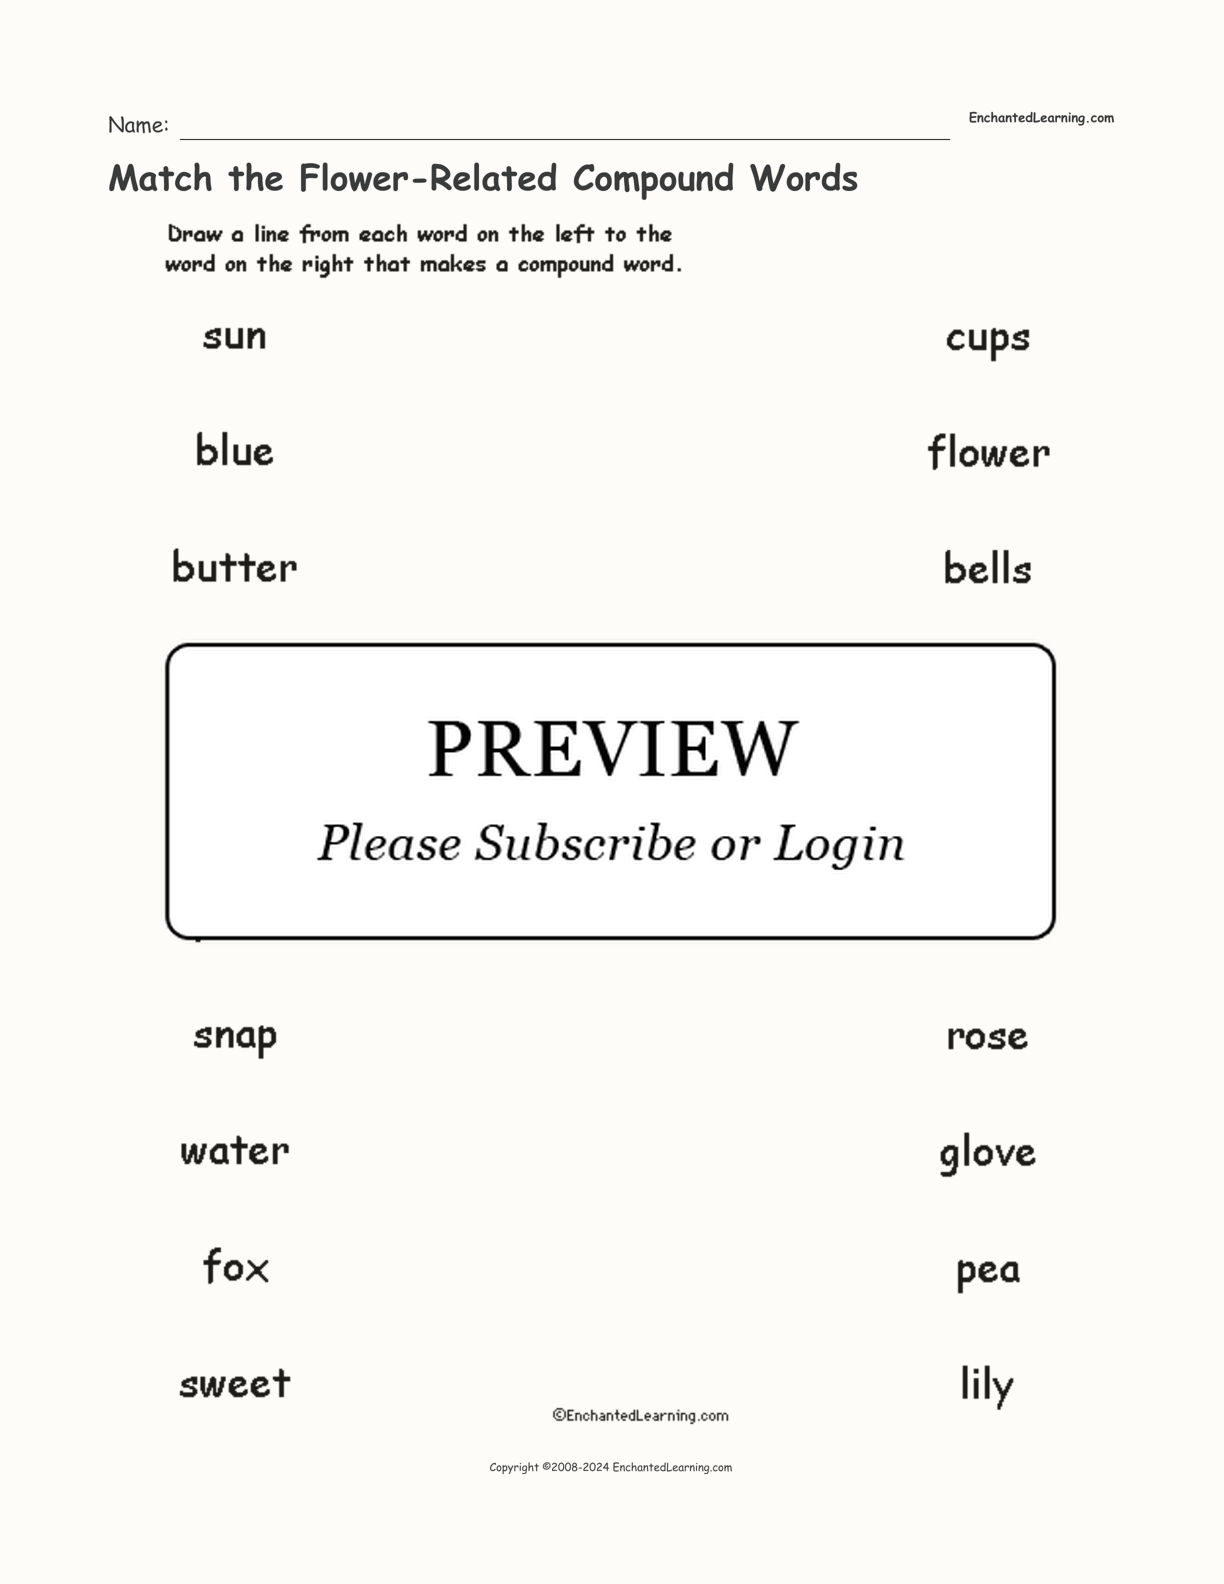 Match the Flower-Related Compound Words interactive worksheet page 1